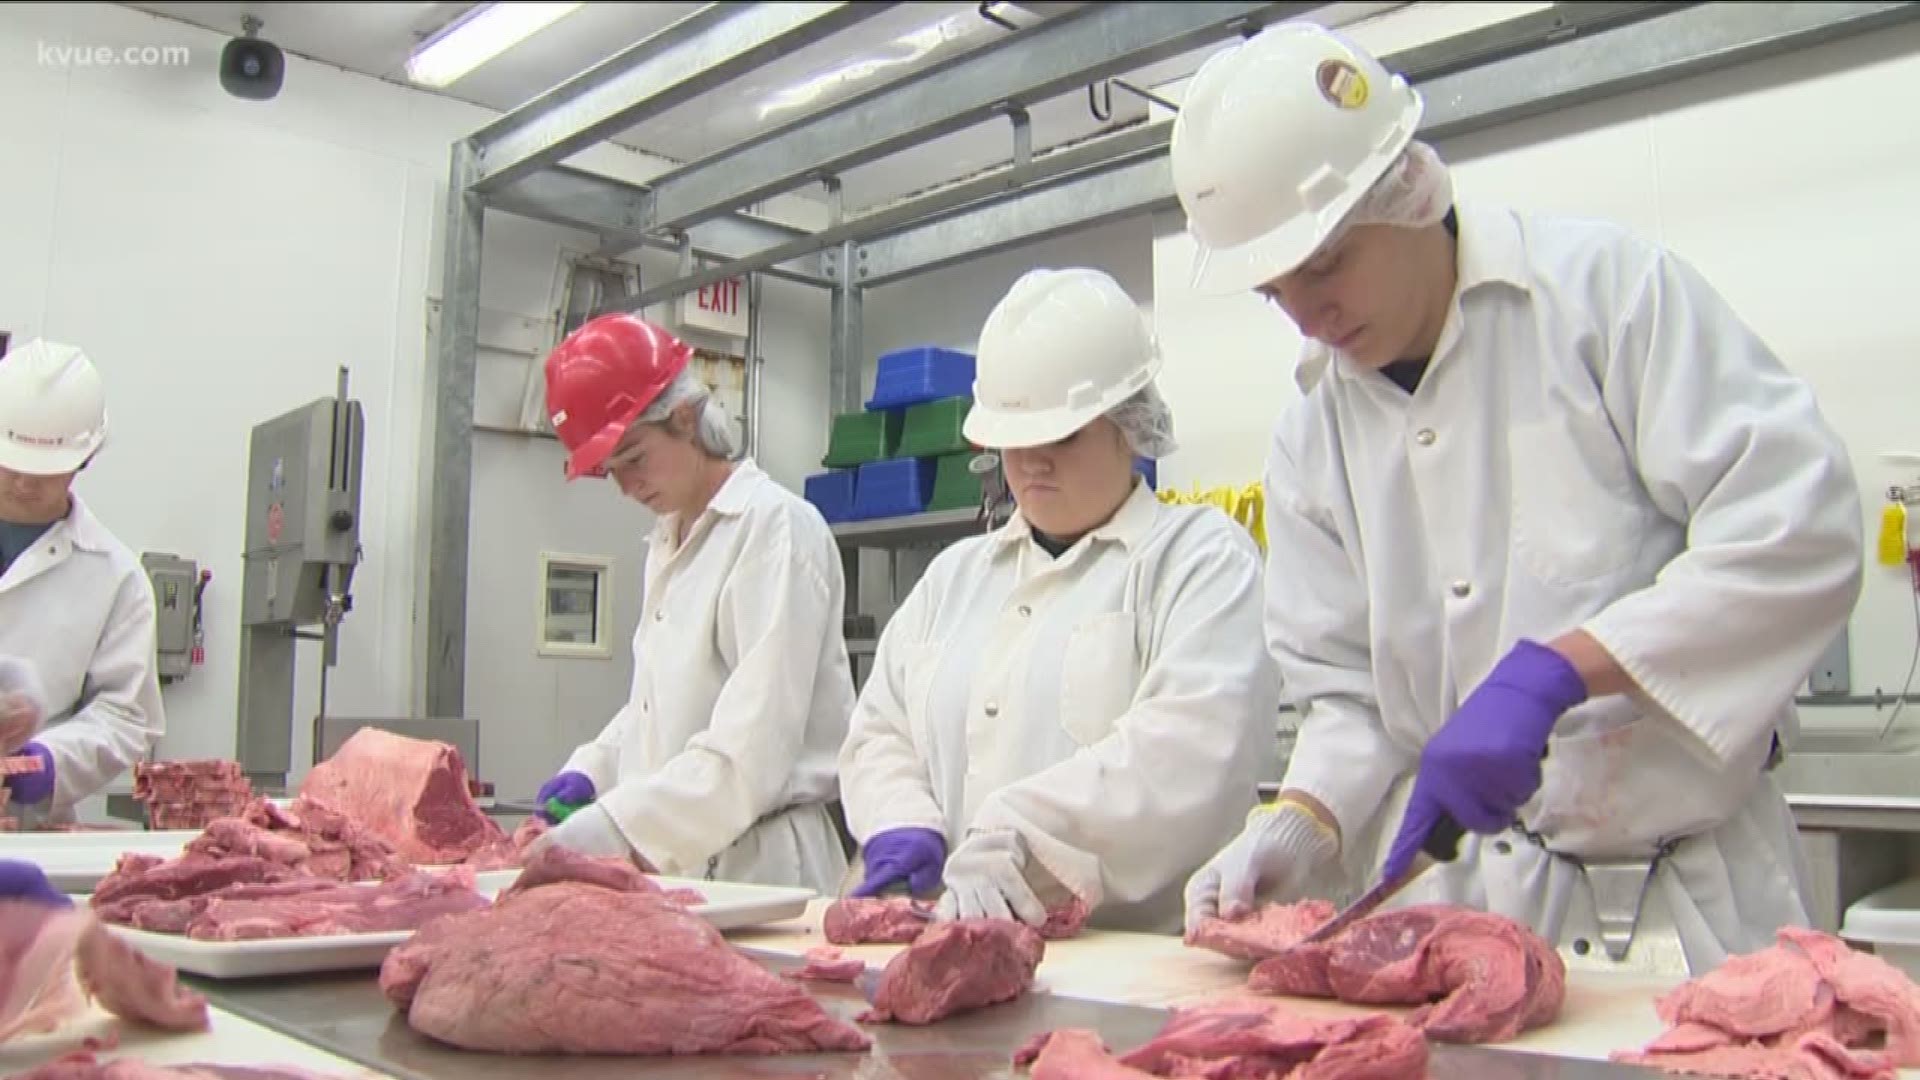 Not only are the Florence High School students learning about the different cuts of beef, pork and lamb, they are also learning how to run a business.